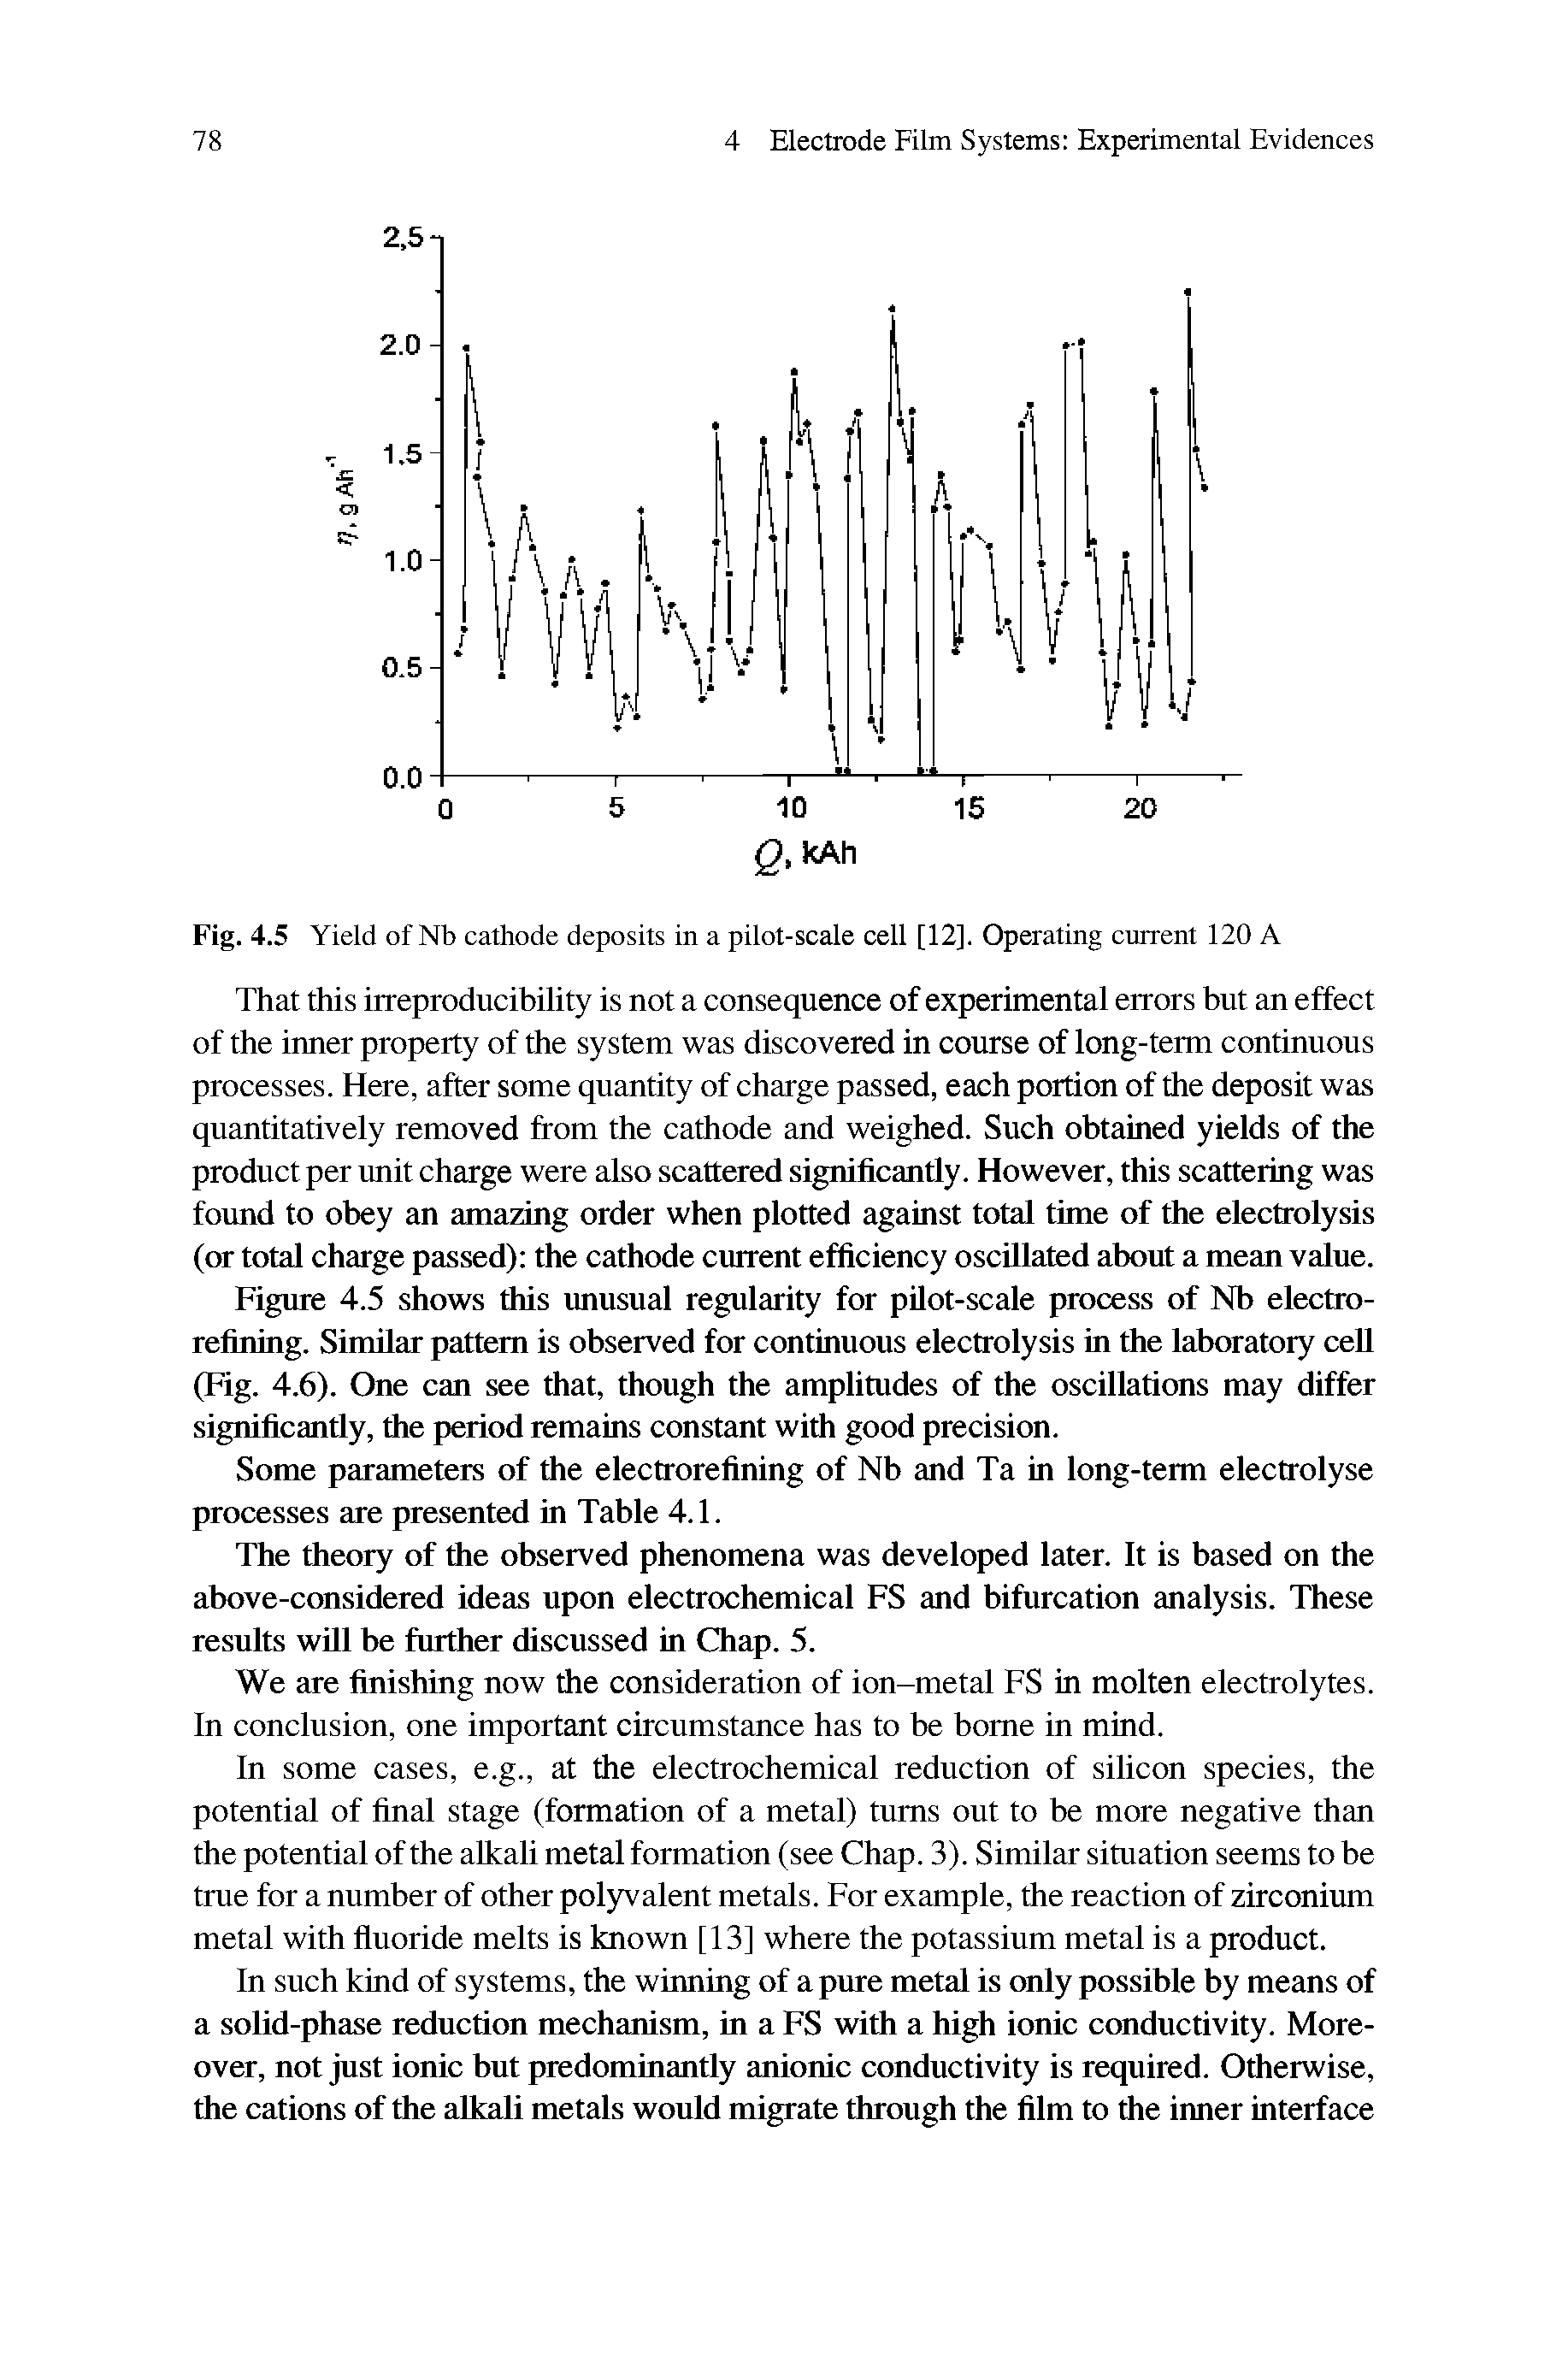 Figure 4.5 shows this unusual regularity for pilot-scale process of Nb electro-refining.. Similar pattern is observed for continuous electrolysis in the laboratory cell (Fig. 4.6). One can see that, though the amplimdes of the oscillations may differ significantly, the period remains constant with good precision.